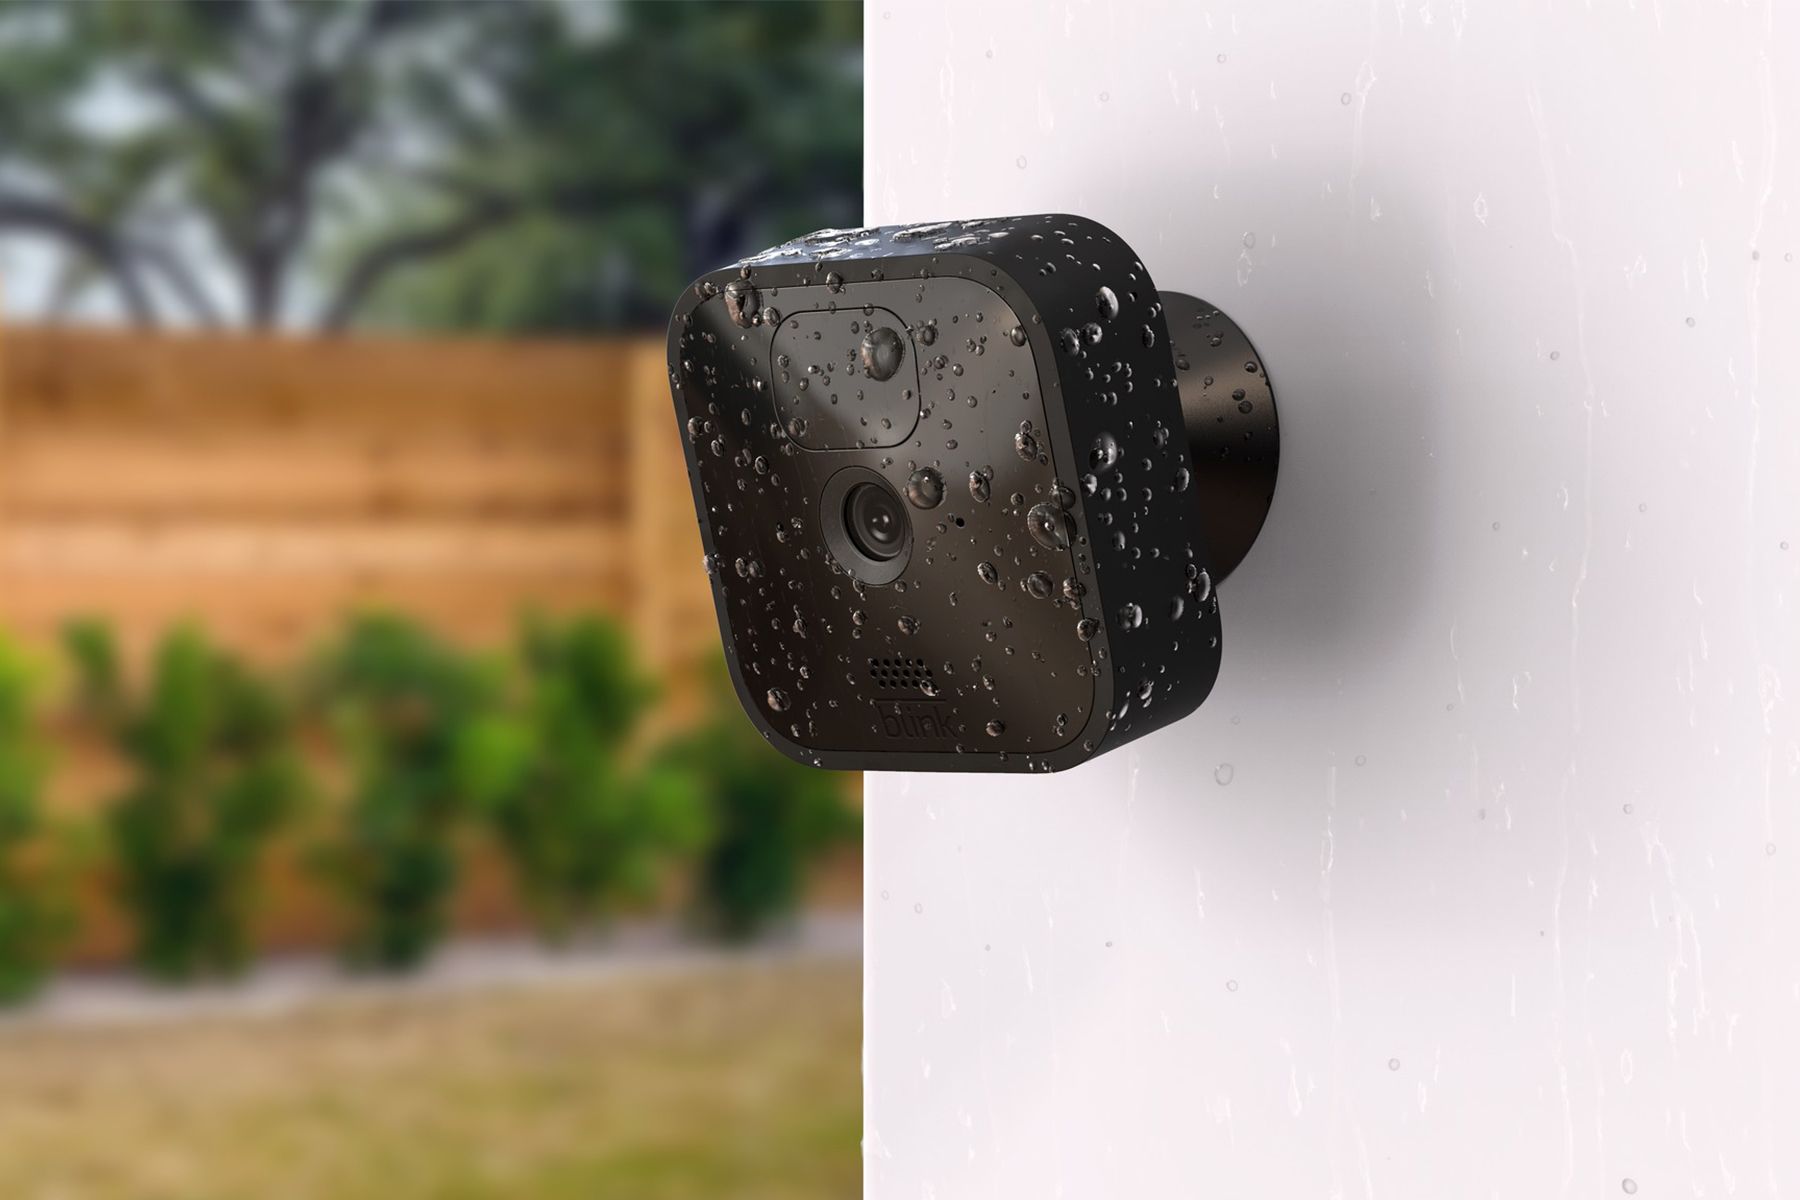 Blink Outdoor Security camera is 50% off for Prime Day